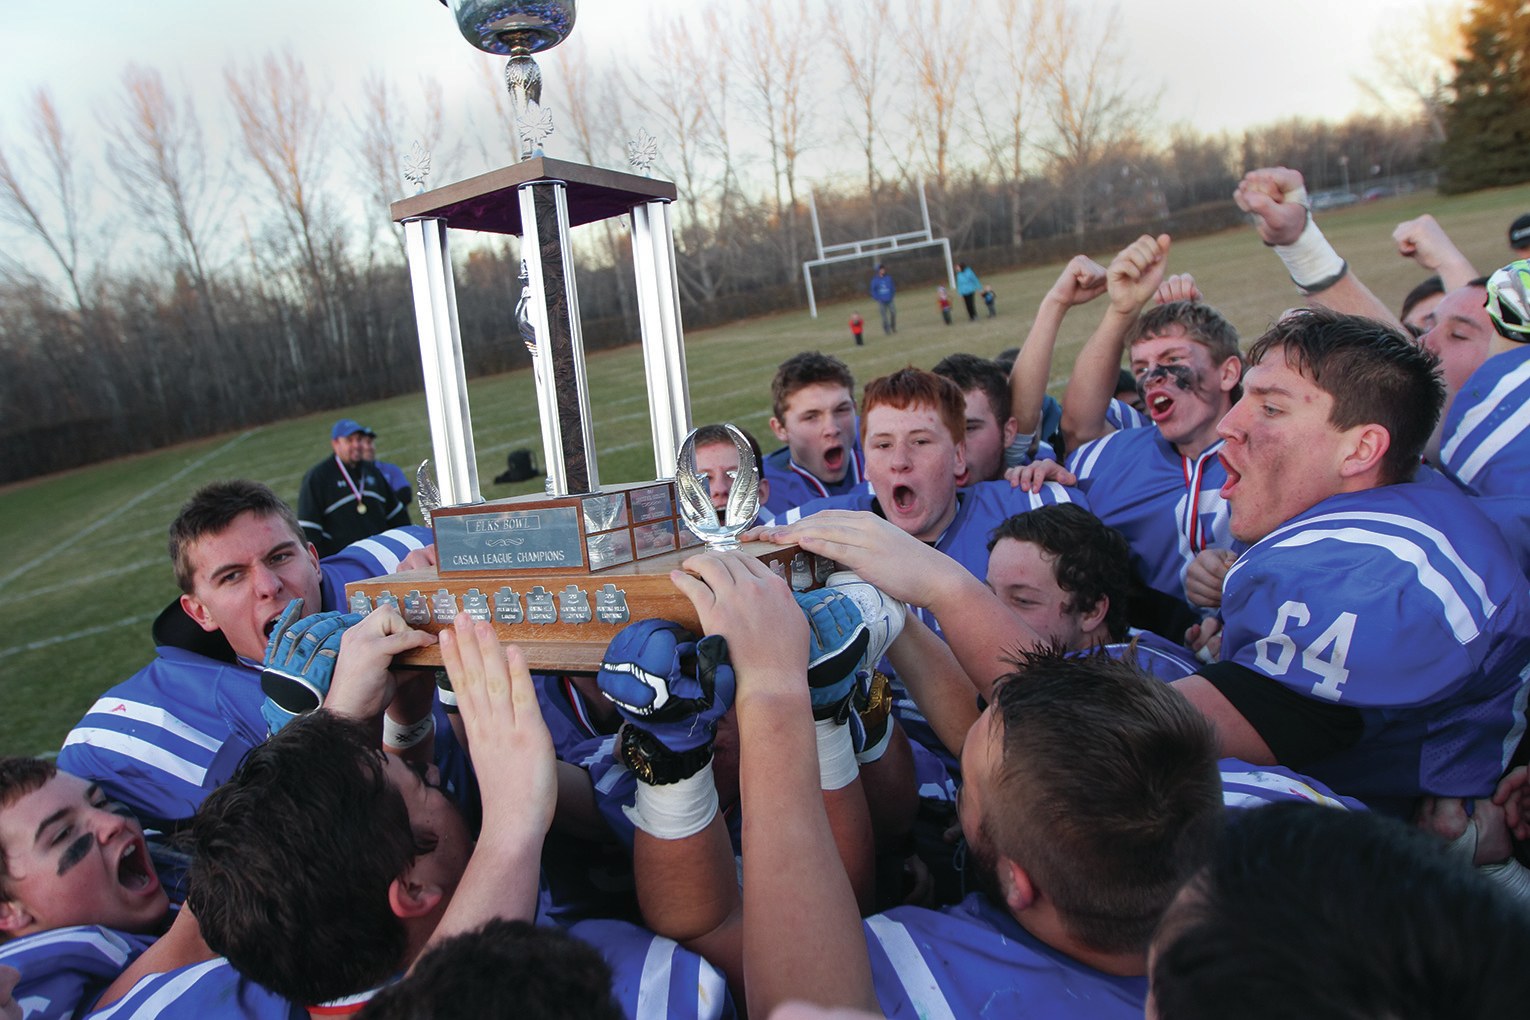 CELEBRATION - The Hunting Hills Lightning celebrated their CASAA League championship win over the Notre Dame Cougars at Great Chief Park last weekend. The Lightning won the game by a score of 29-7.